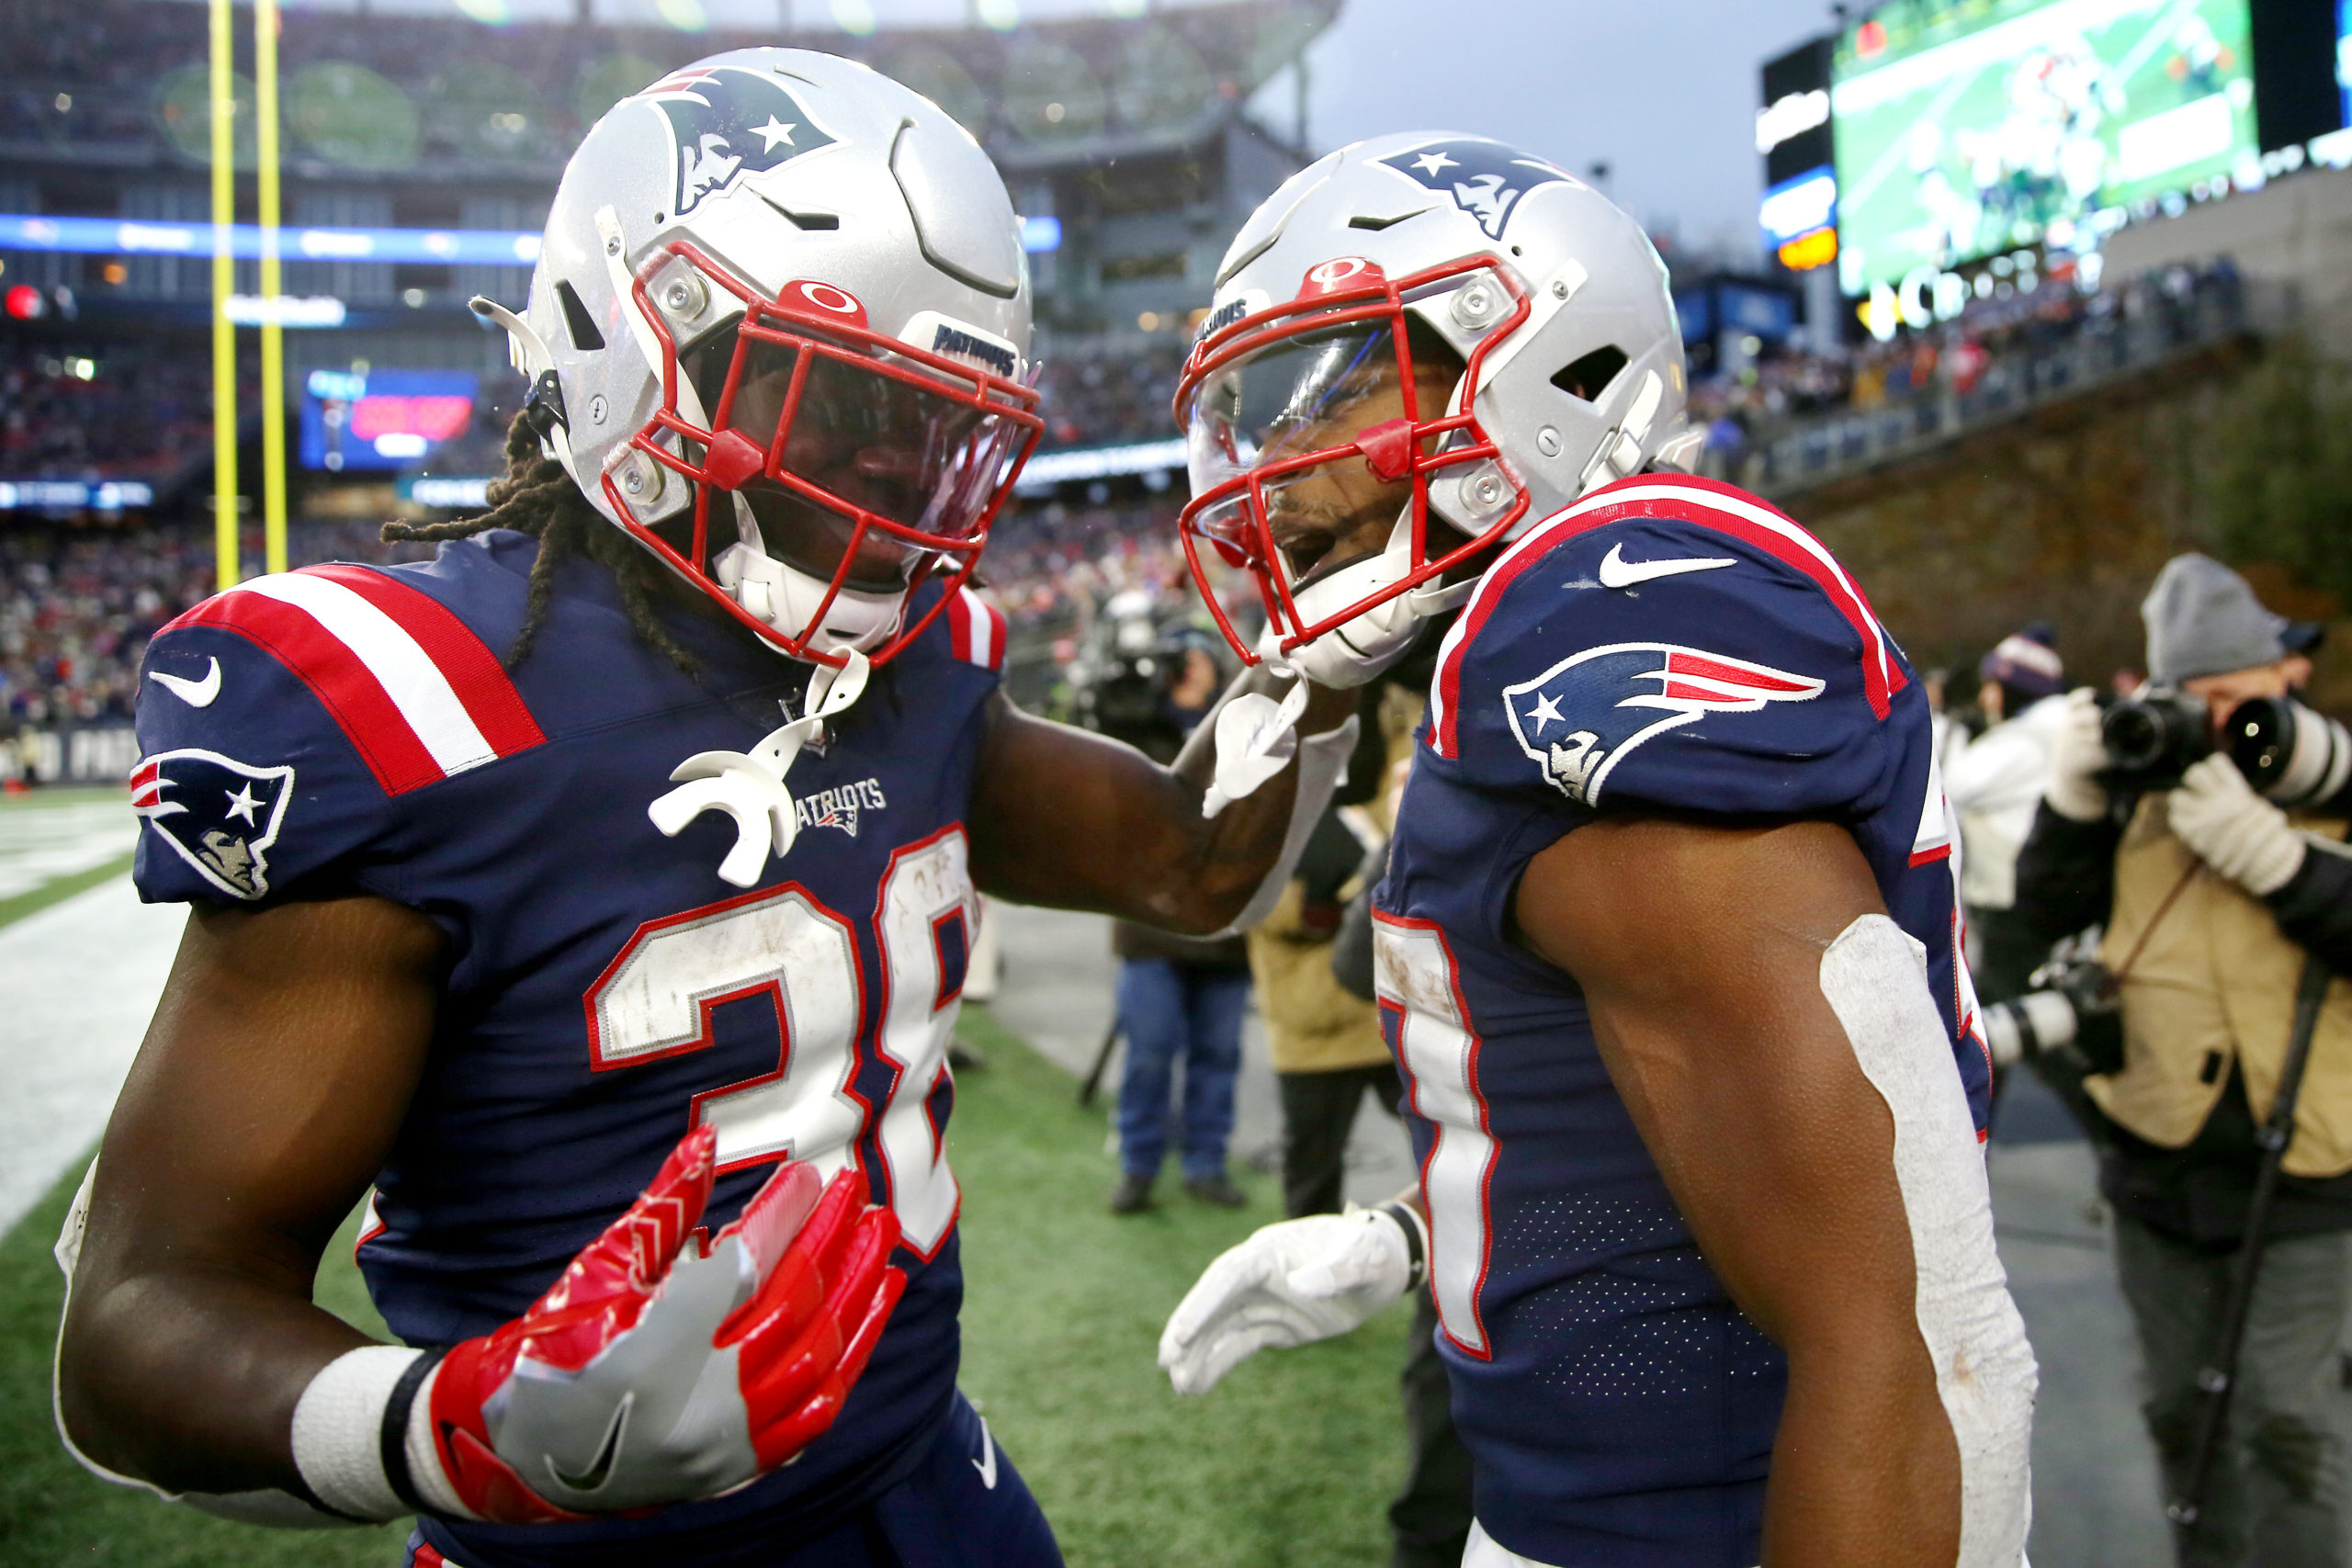 FOXBOROUGH, MASSACHUSETTS - NOVEMBER 28: Damien Harris #37 of the New England Patriots celebrates with Rhamondre Stevenson #38 after scoring a rushing touchdown against the Tennessee Titans in the fourth quarter at Gillette Stadium on November 28, 2021 in Foxborough, Massachusetts. Adam Glanzman/Getty Images